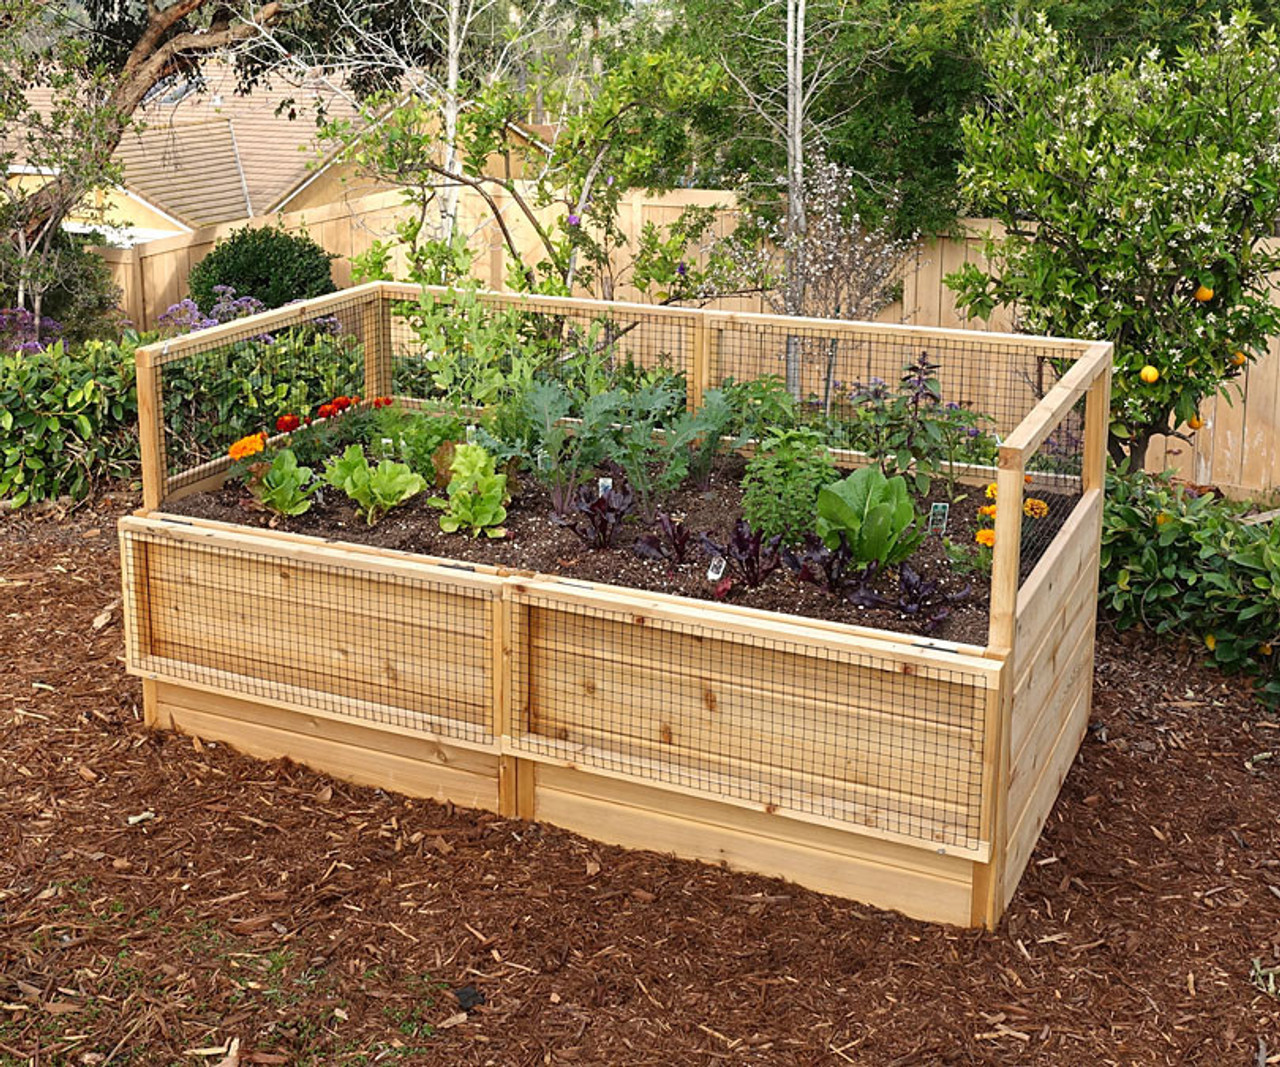 3 x 6 Raised Garden Bed With Hinged Fencing Eartheasy